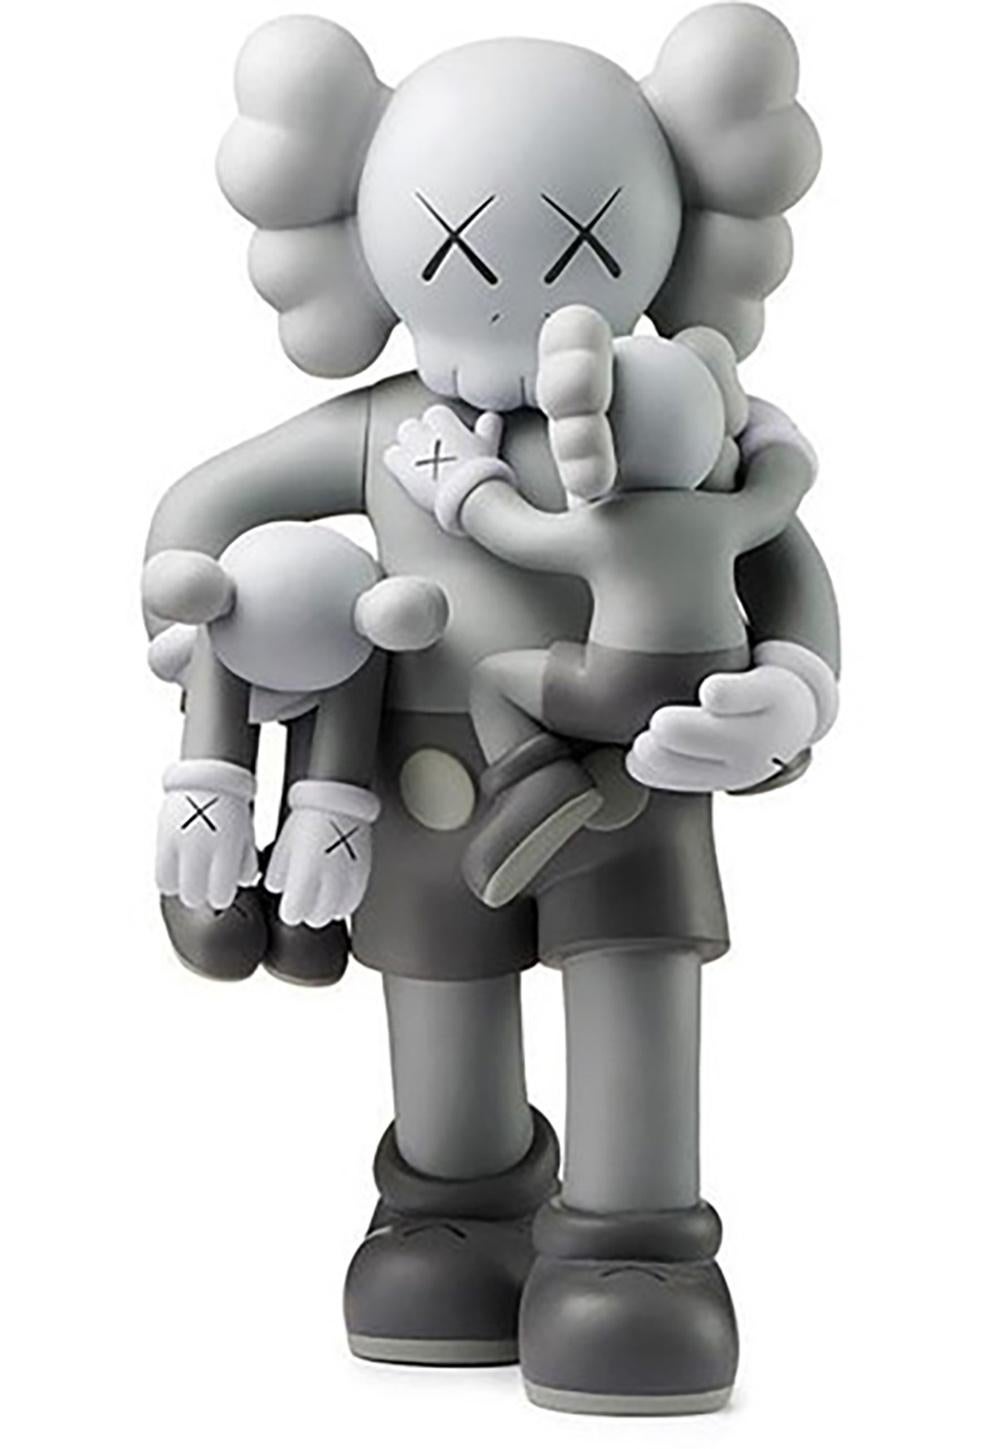 what is kaws brand